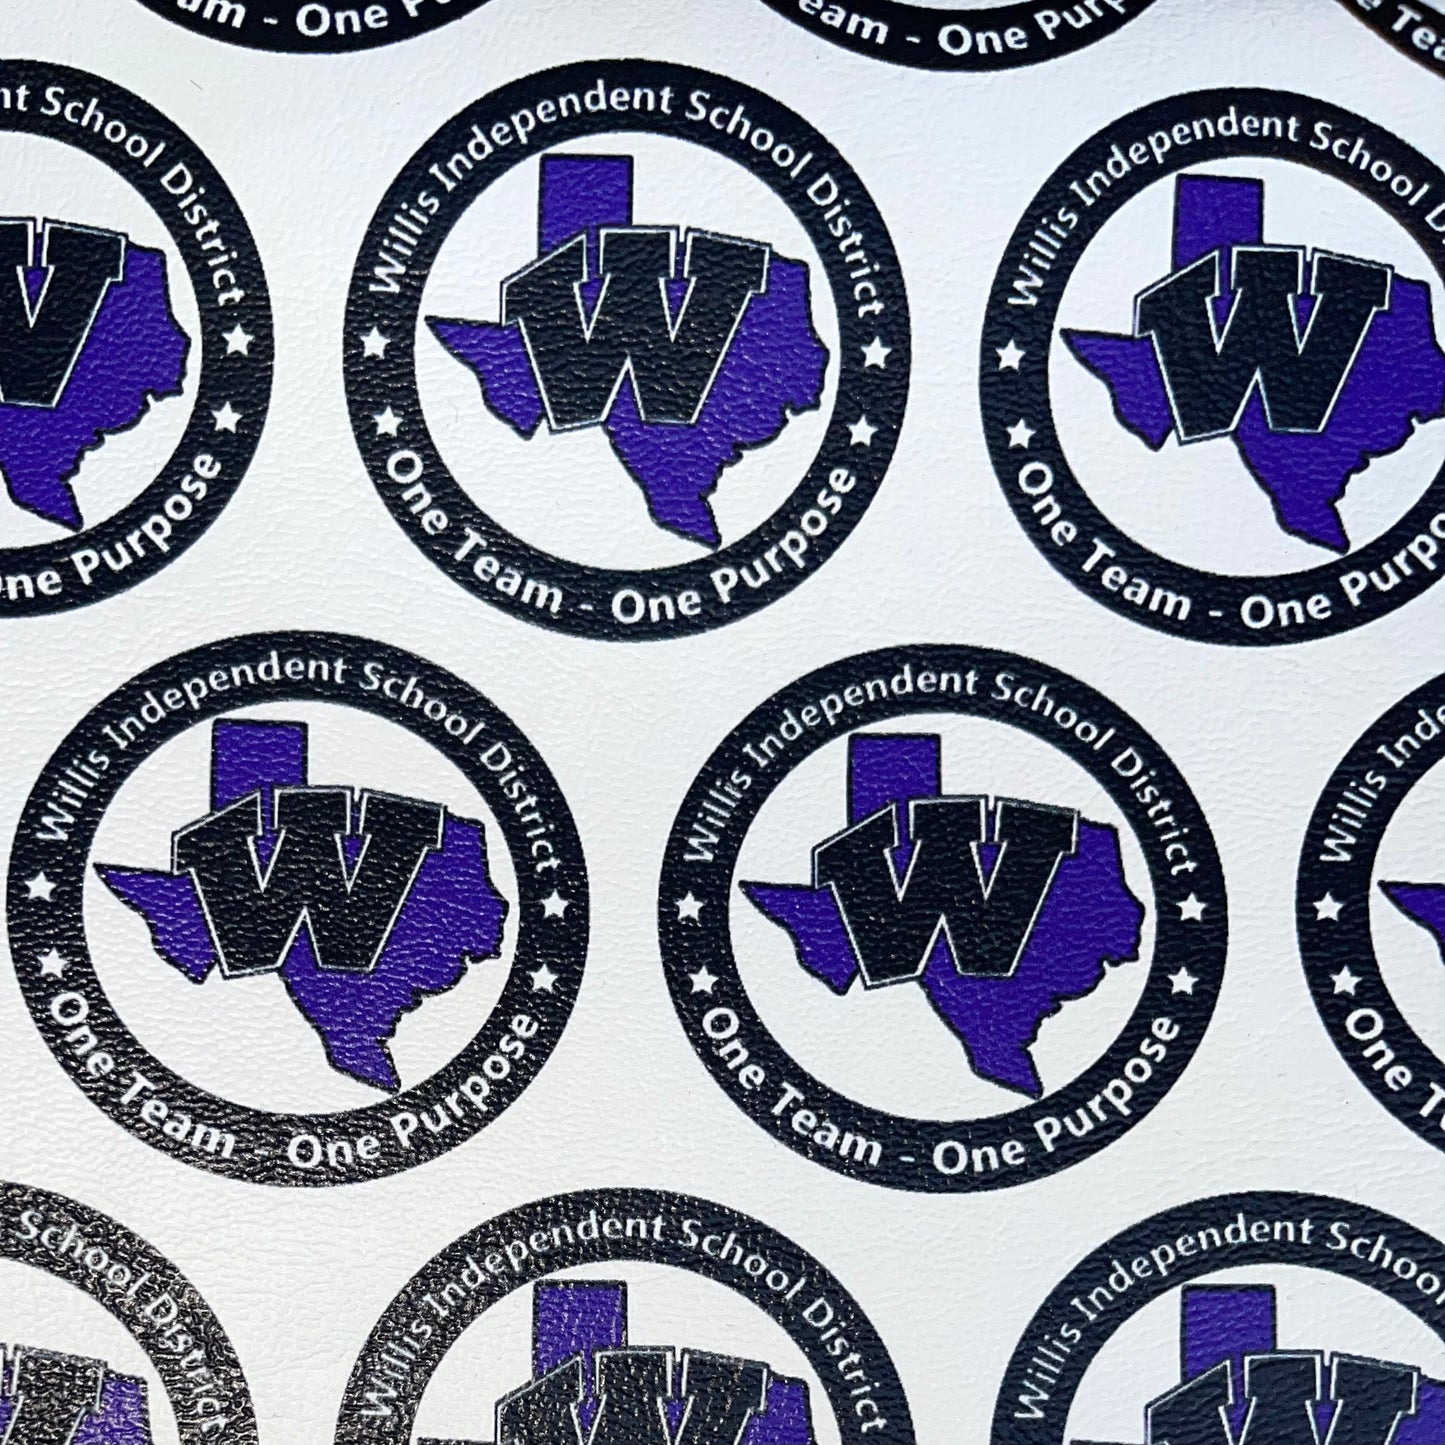 Willis Wildcats (Made to Order- 14 Business Day turnaround)